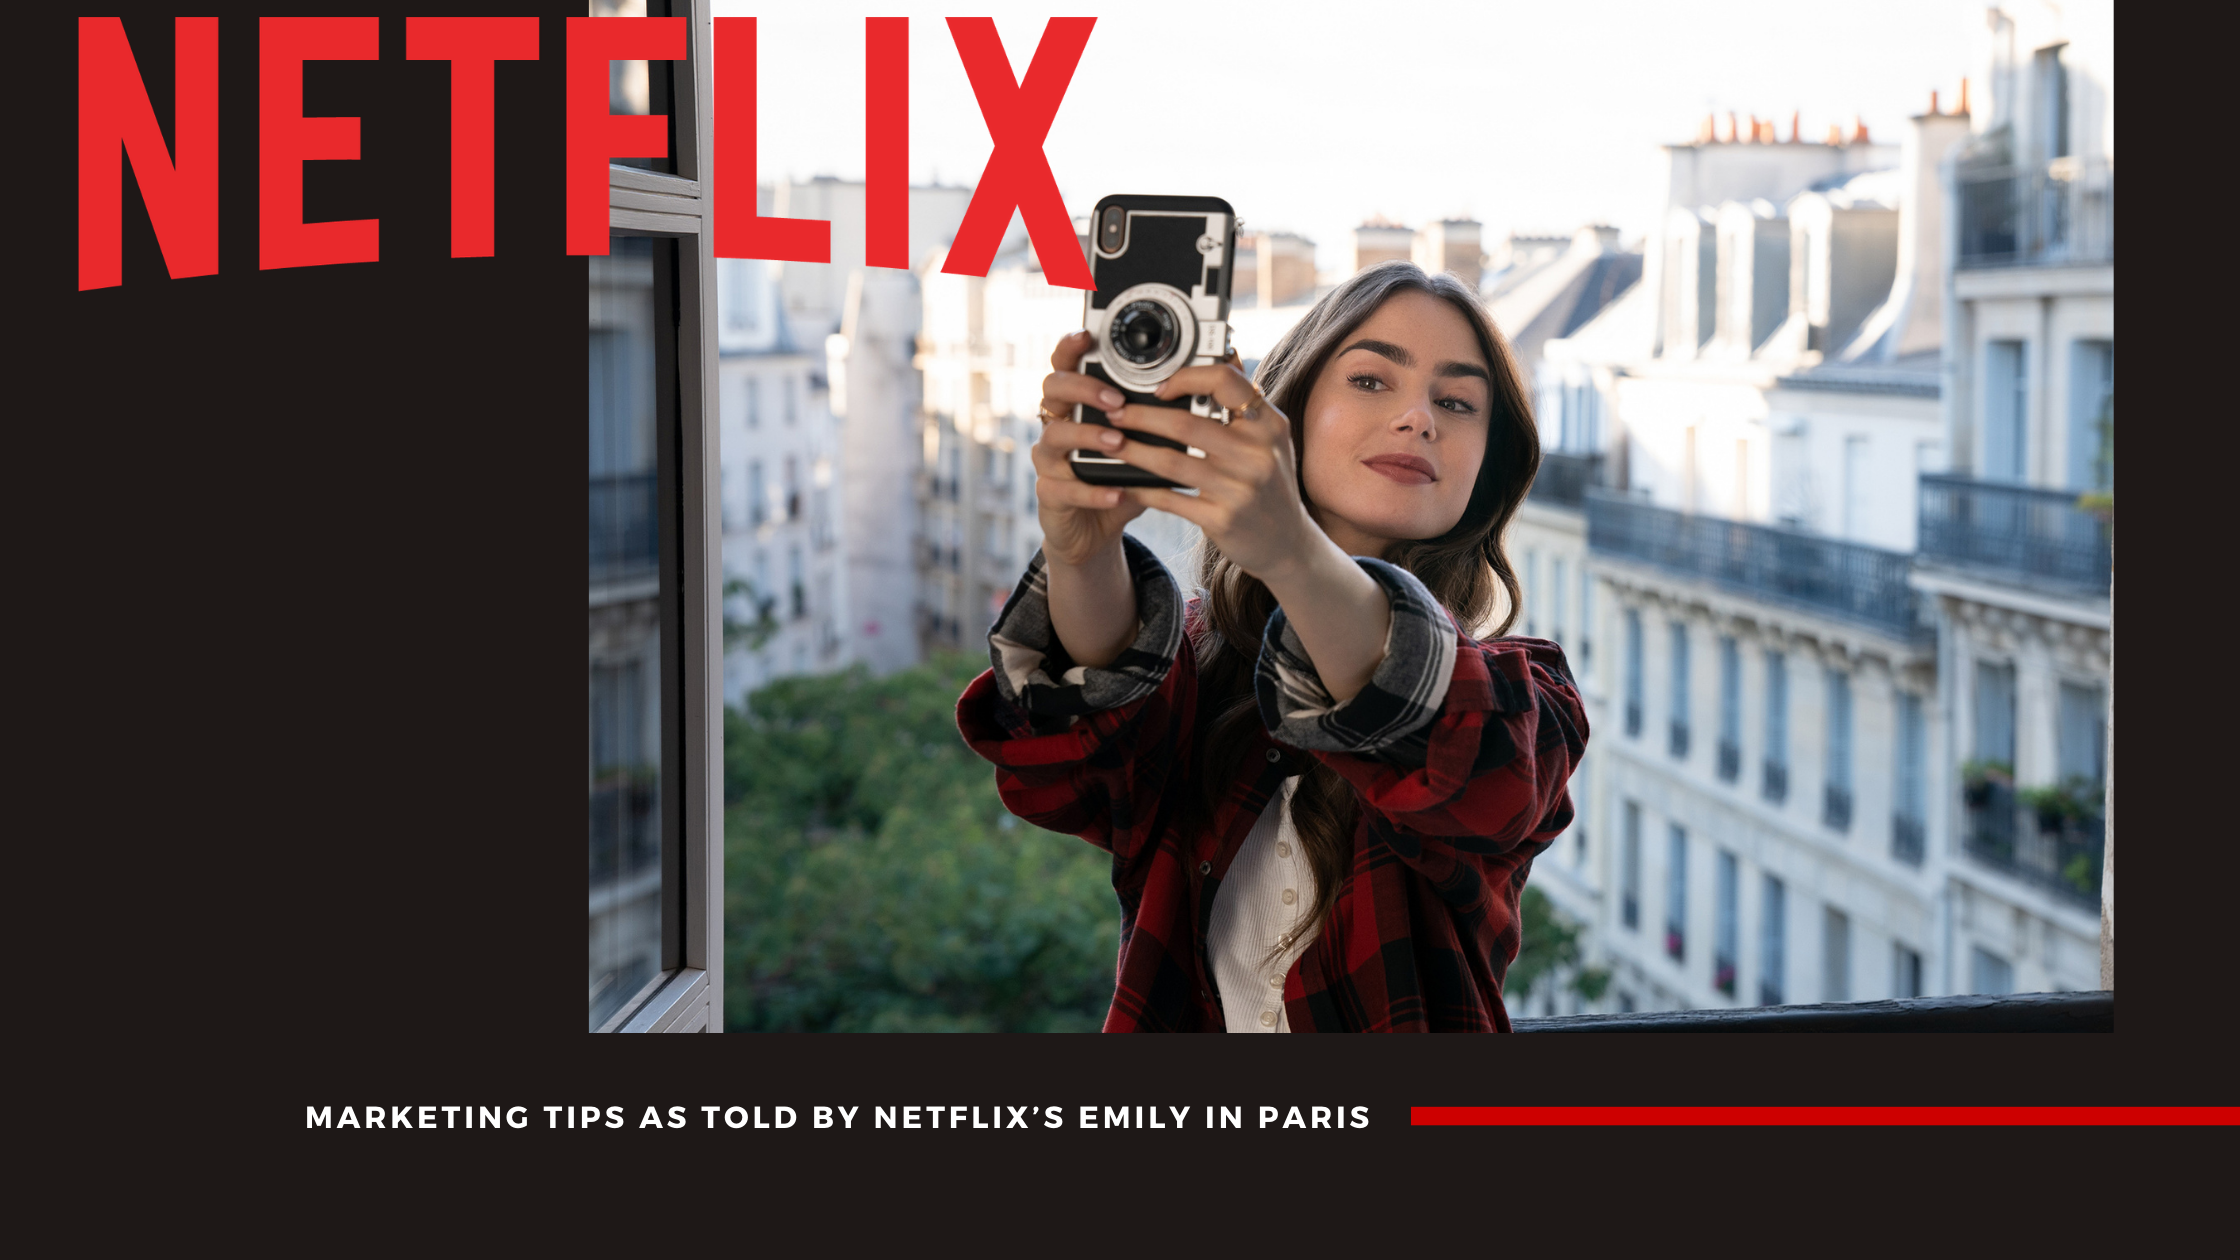 5 Smart Marketing Lessons from Emily in Paris